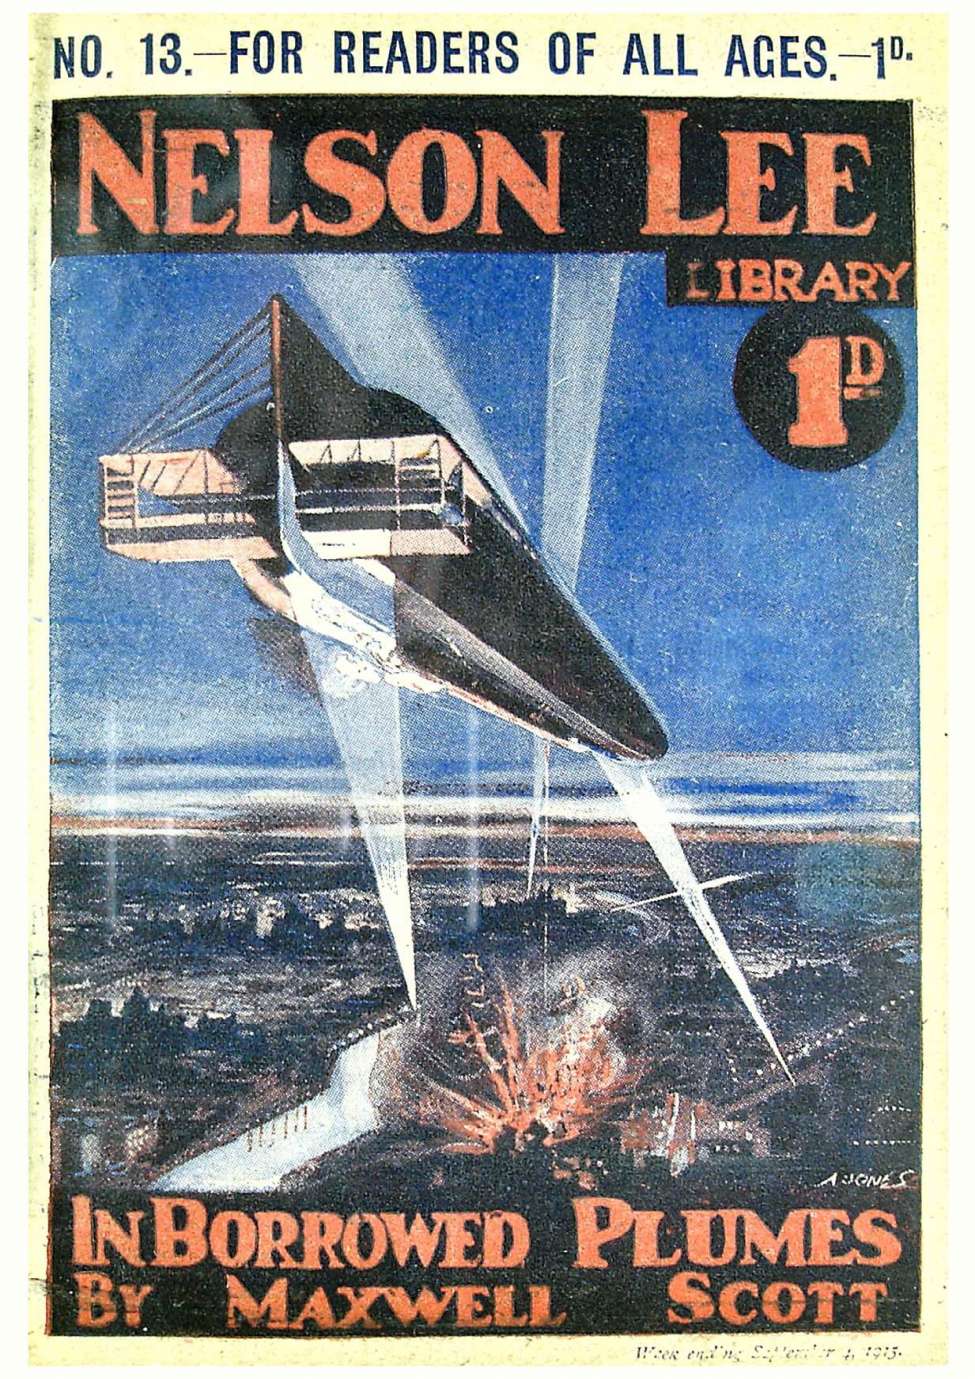 Book Cover For Nelson Lee Library s1 13 - In Borrowed Plumes